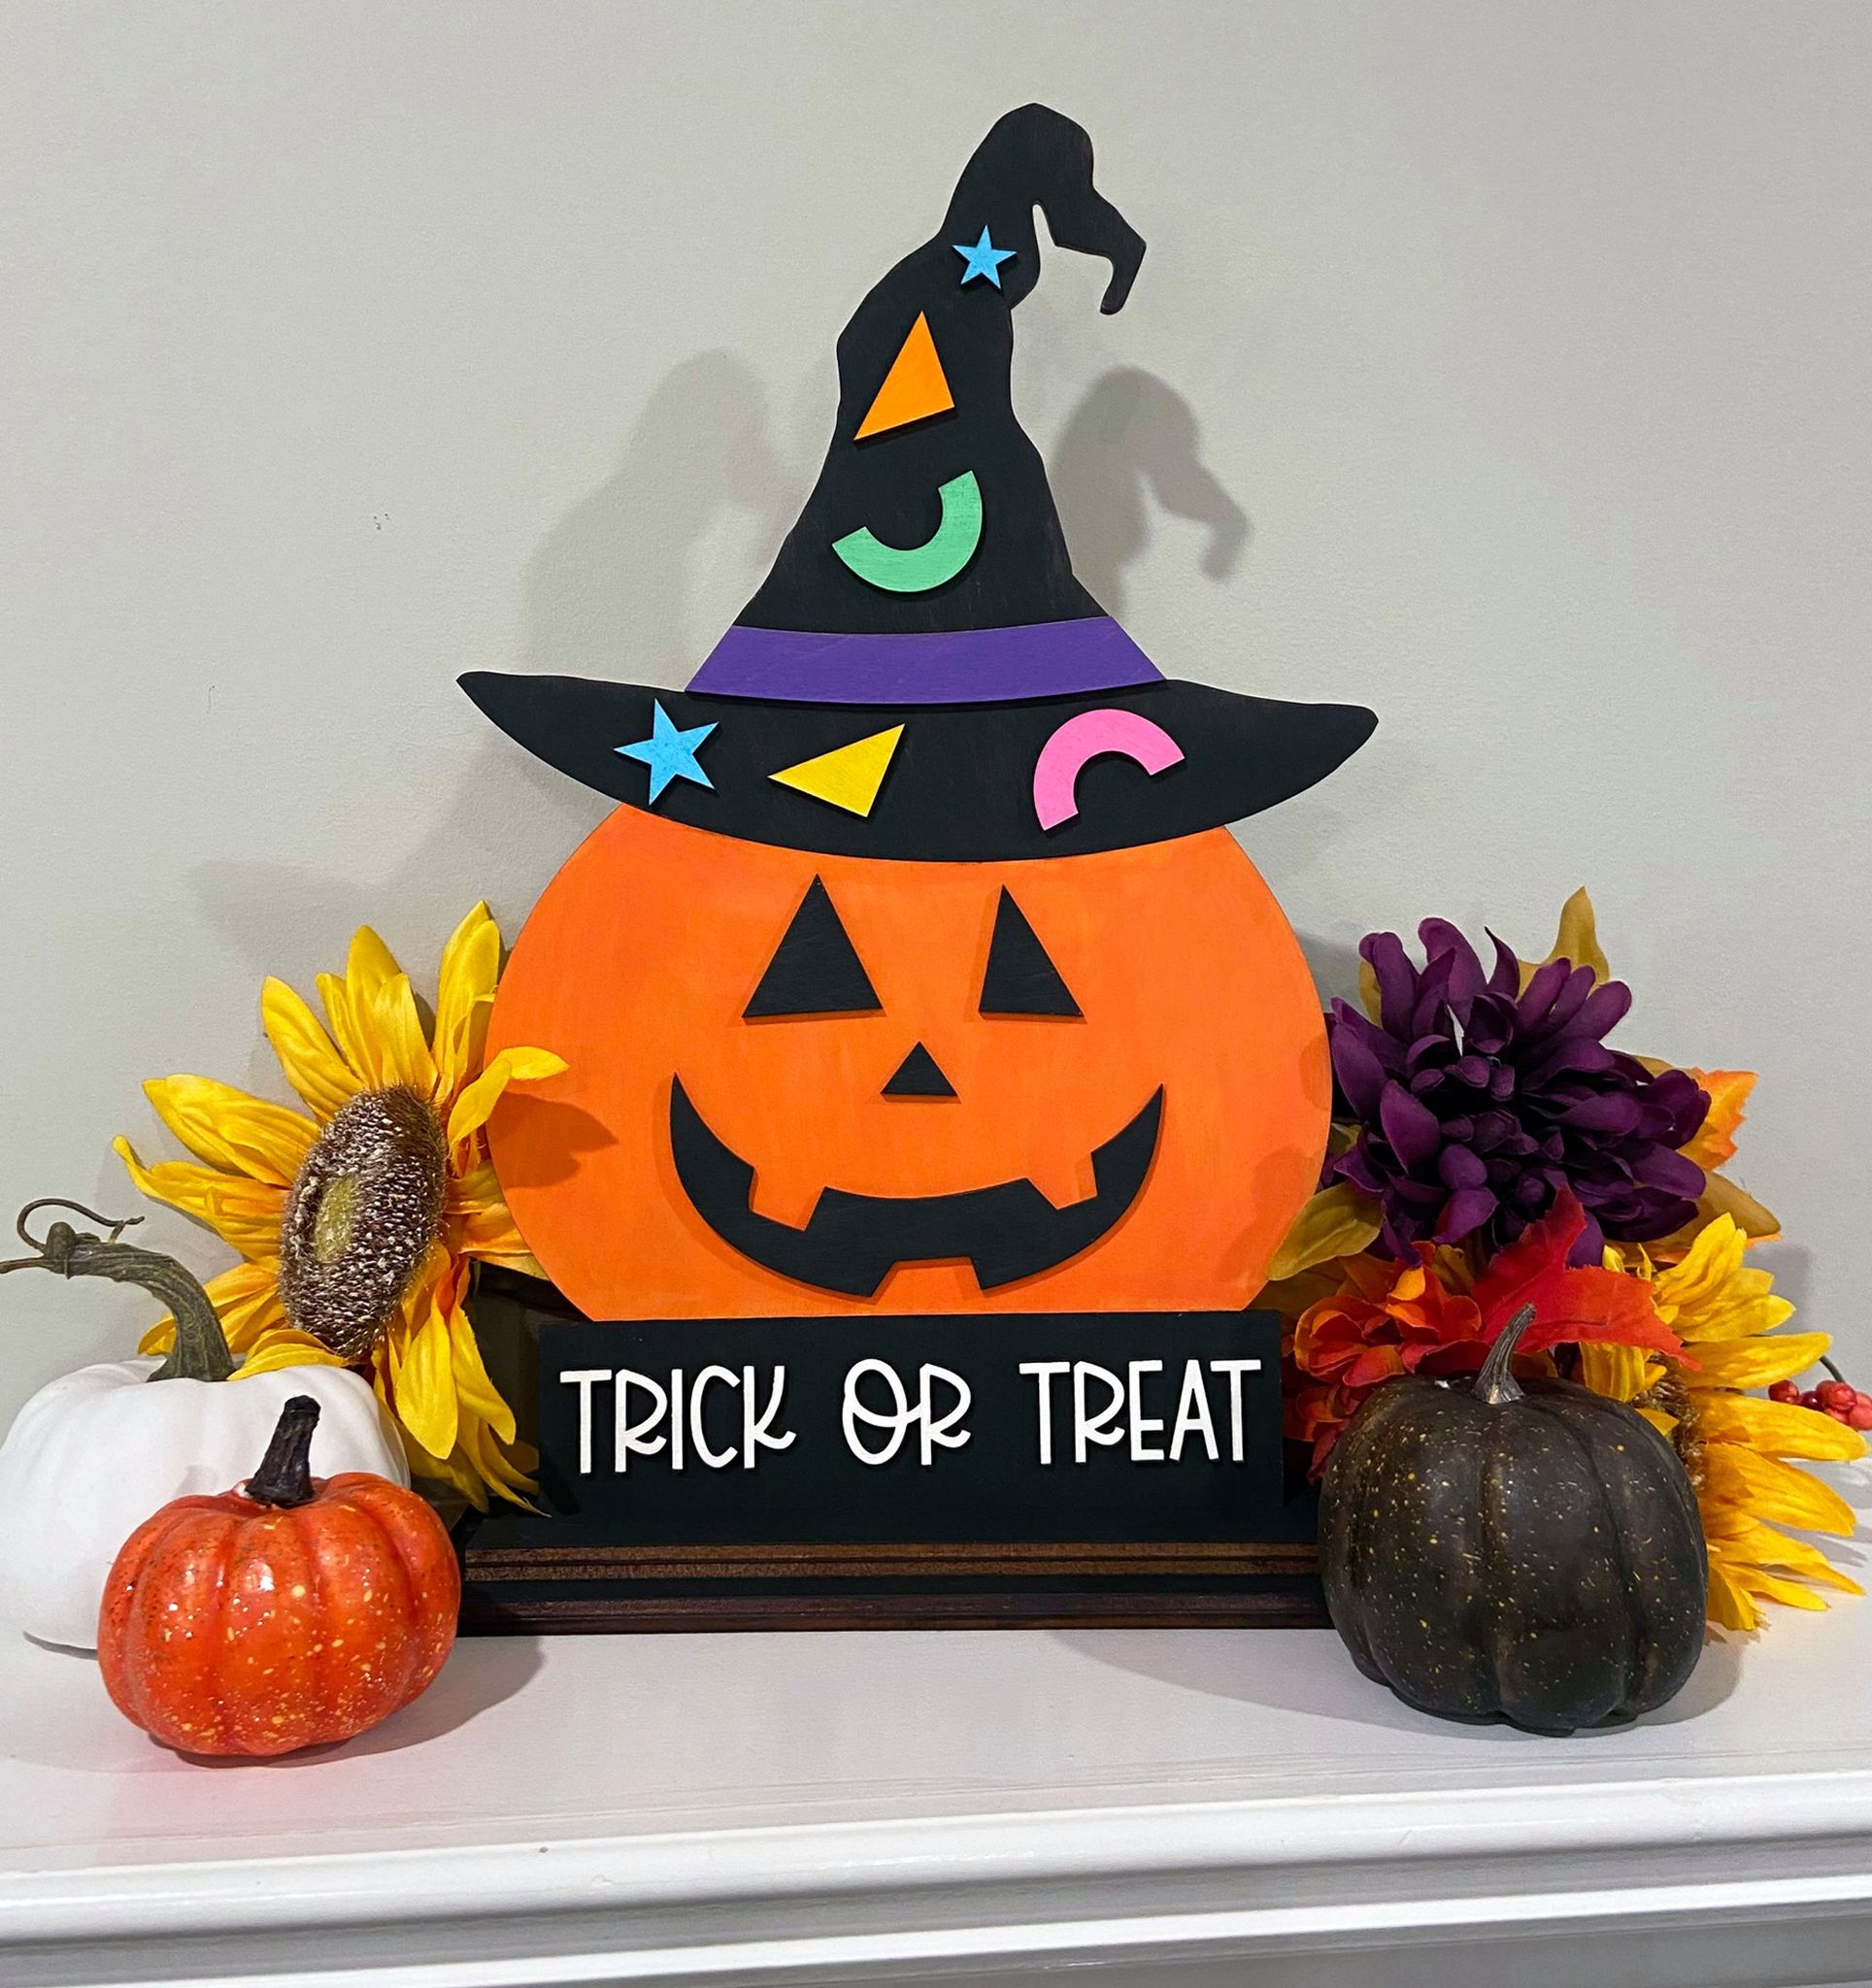 3D Trick or Treat Pumpkin with witch hat